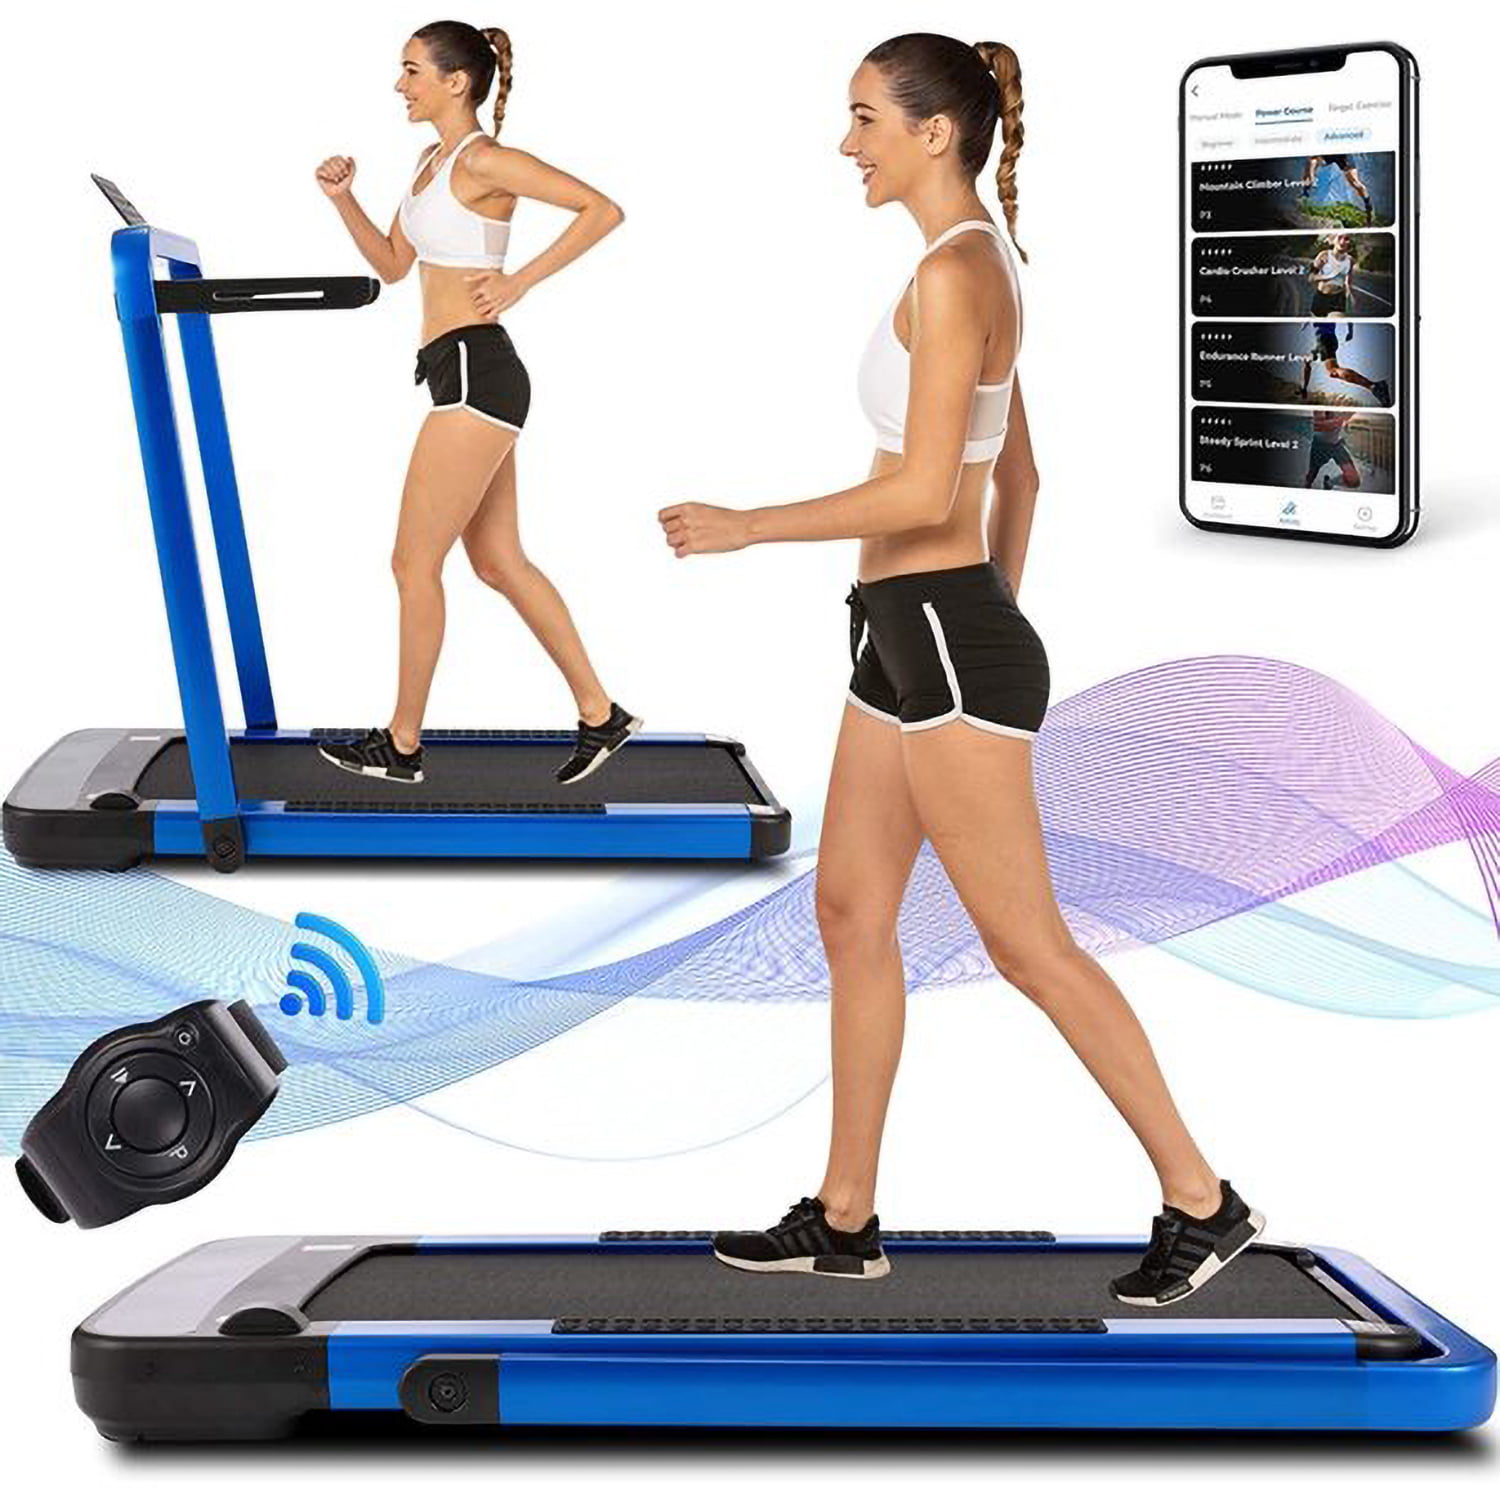 Walking&Jogging Portable Running Machine with Bluetooth Speaker & Remote Control,5 Modes & 12 Programs,No Assembly Required FUNMILY Treadmill,Under Desk Folding Treadmills for Home,2-in-1 Running 